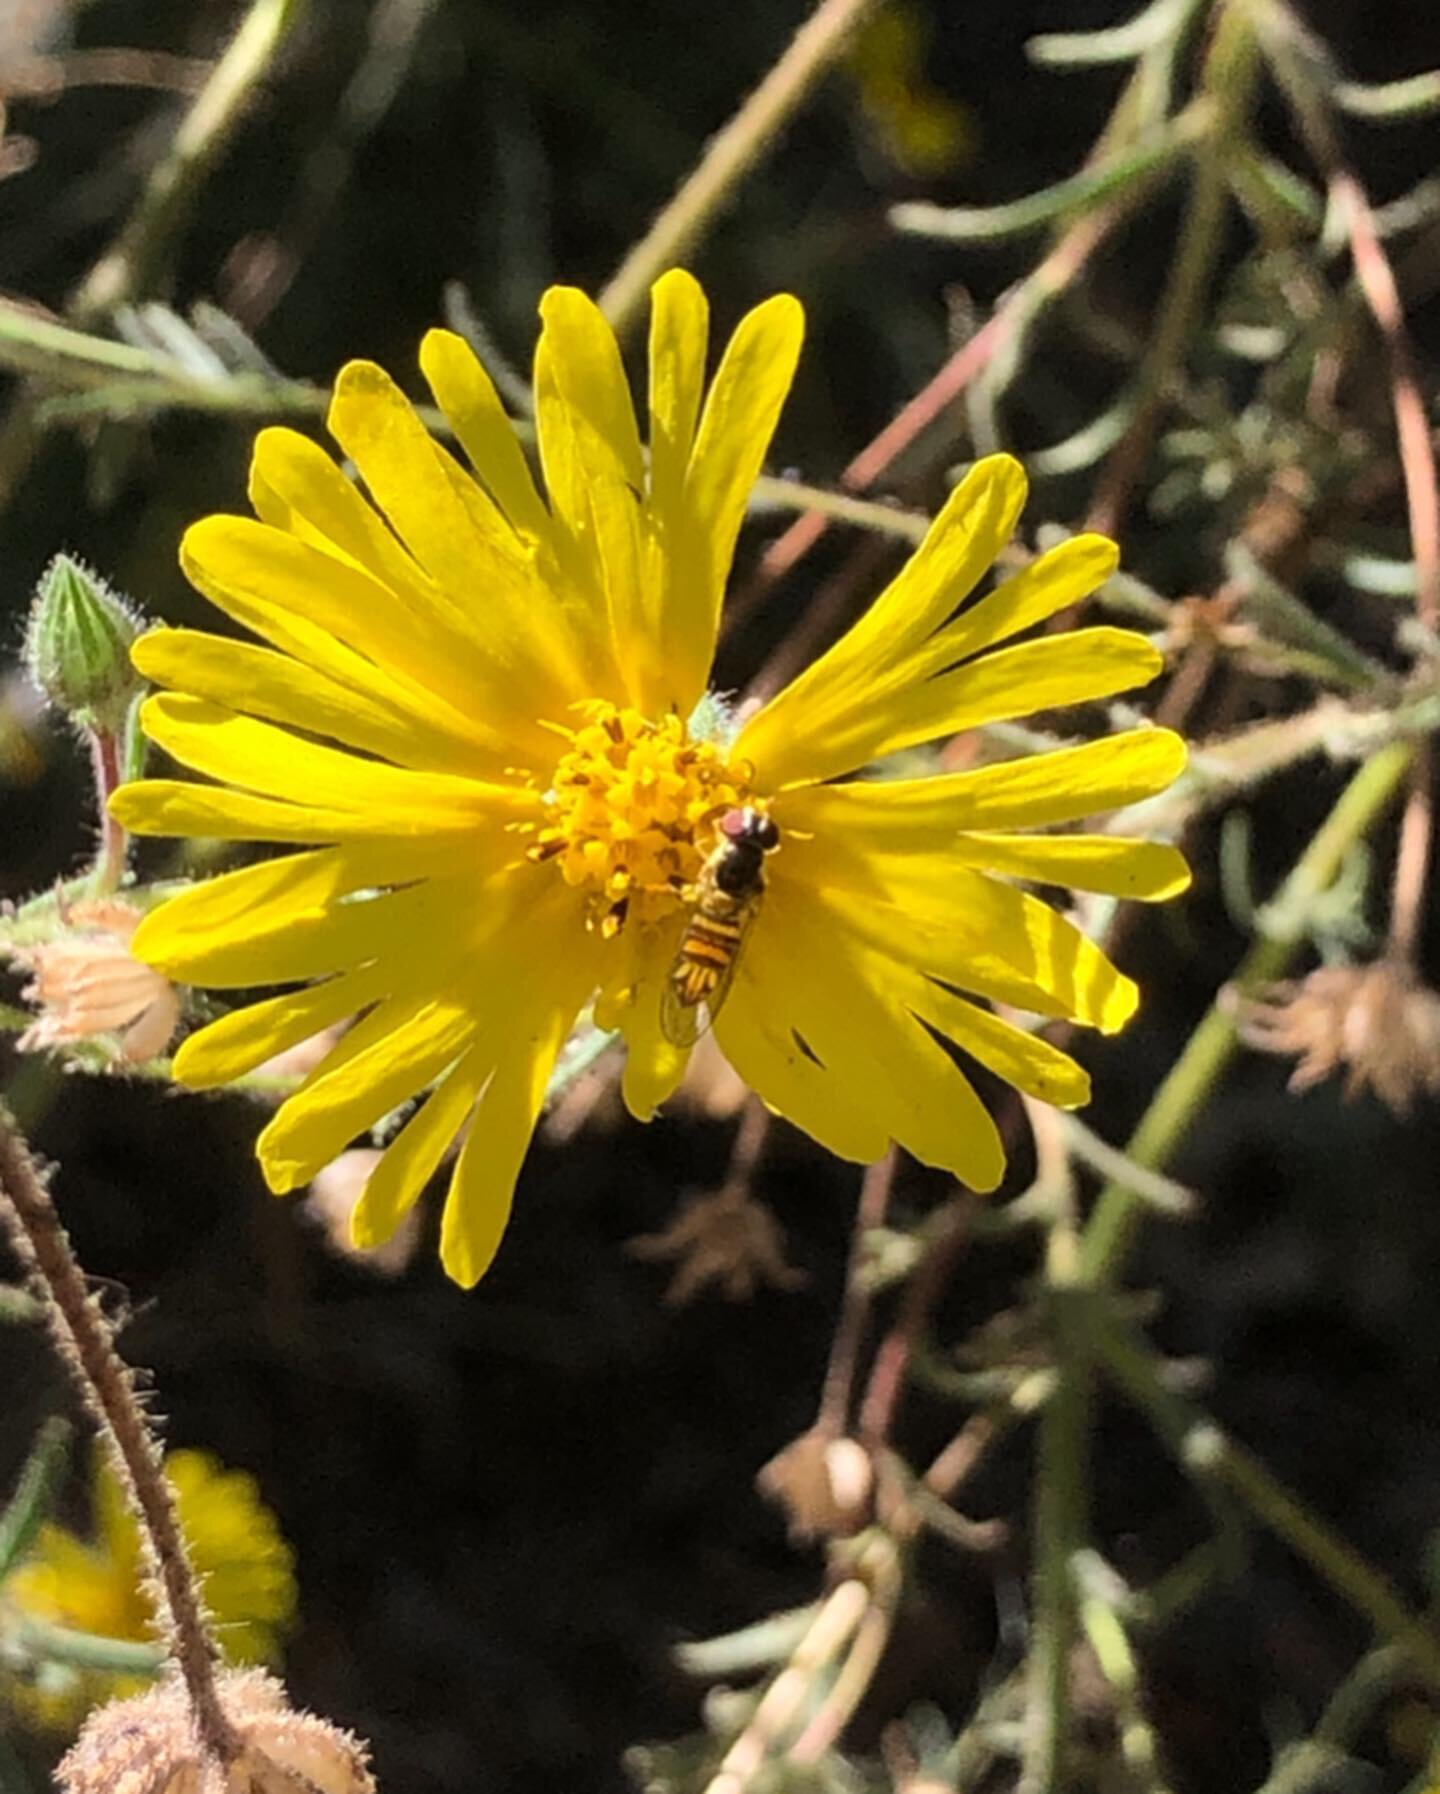 To celebrate the shift to autumn, a tarweed appreciation post! Here are some fun facts about this late summer/fall-blooming annual&hellip;

Fact #1: Tarweeds (Madia species) are Miridae founder Billy Krimmel's absolute favorite plants and have freque